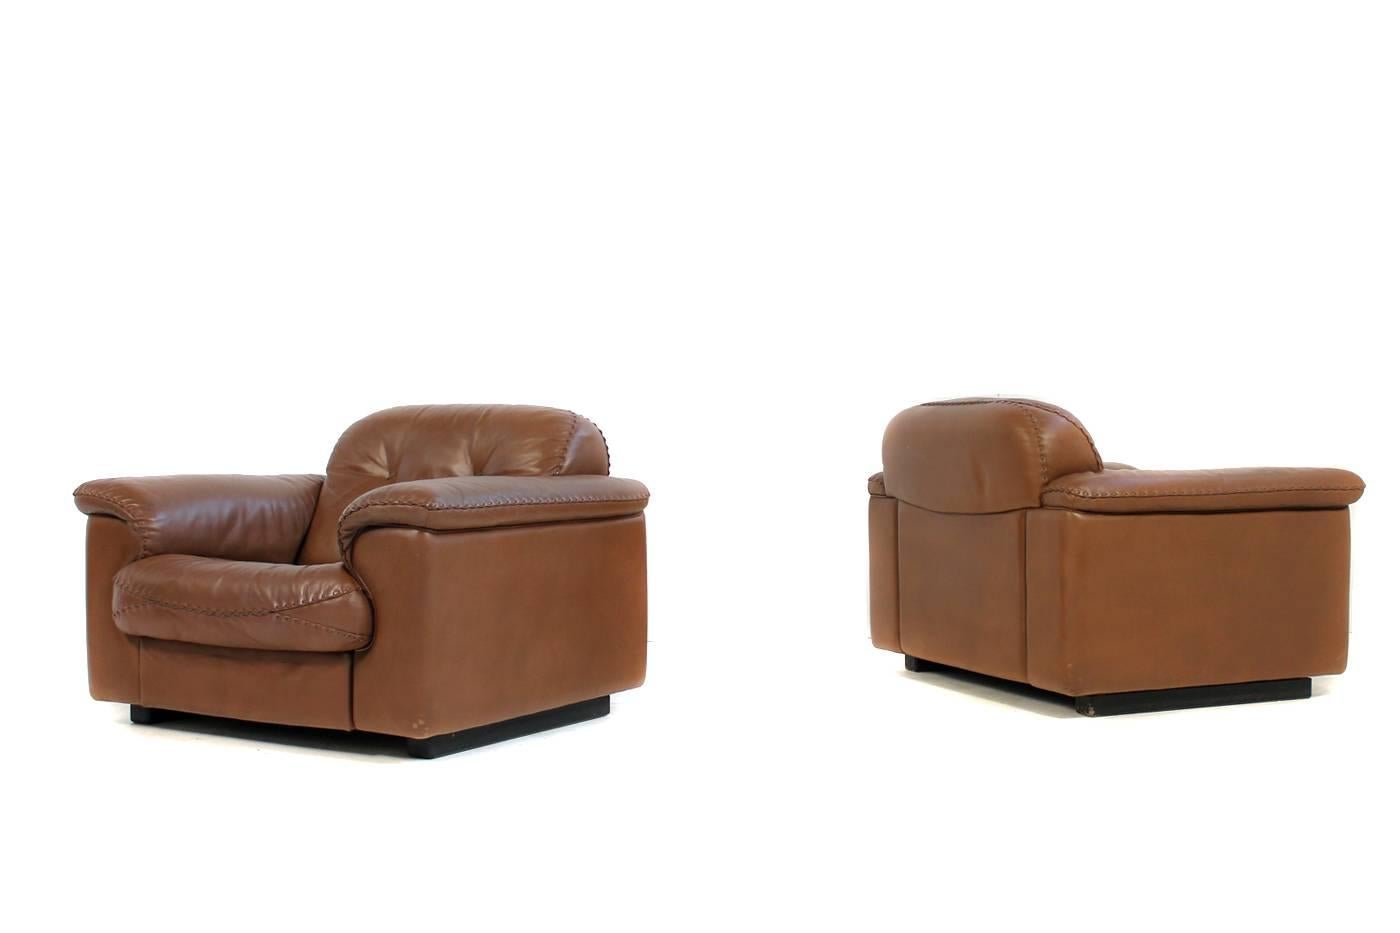 A beautiful pair of rare De Sede DS 101 high quality and heavy weight lounge chairs with an extendable seat. Very good condition and quality. High quality neck leather. We have a matching sofa also available. The De Sede DS 101 was seen in the 1960s